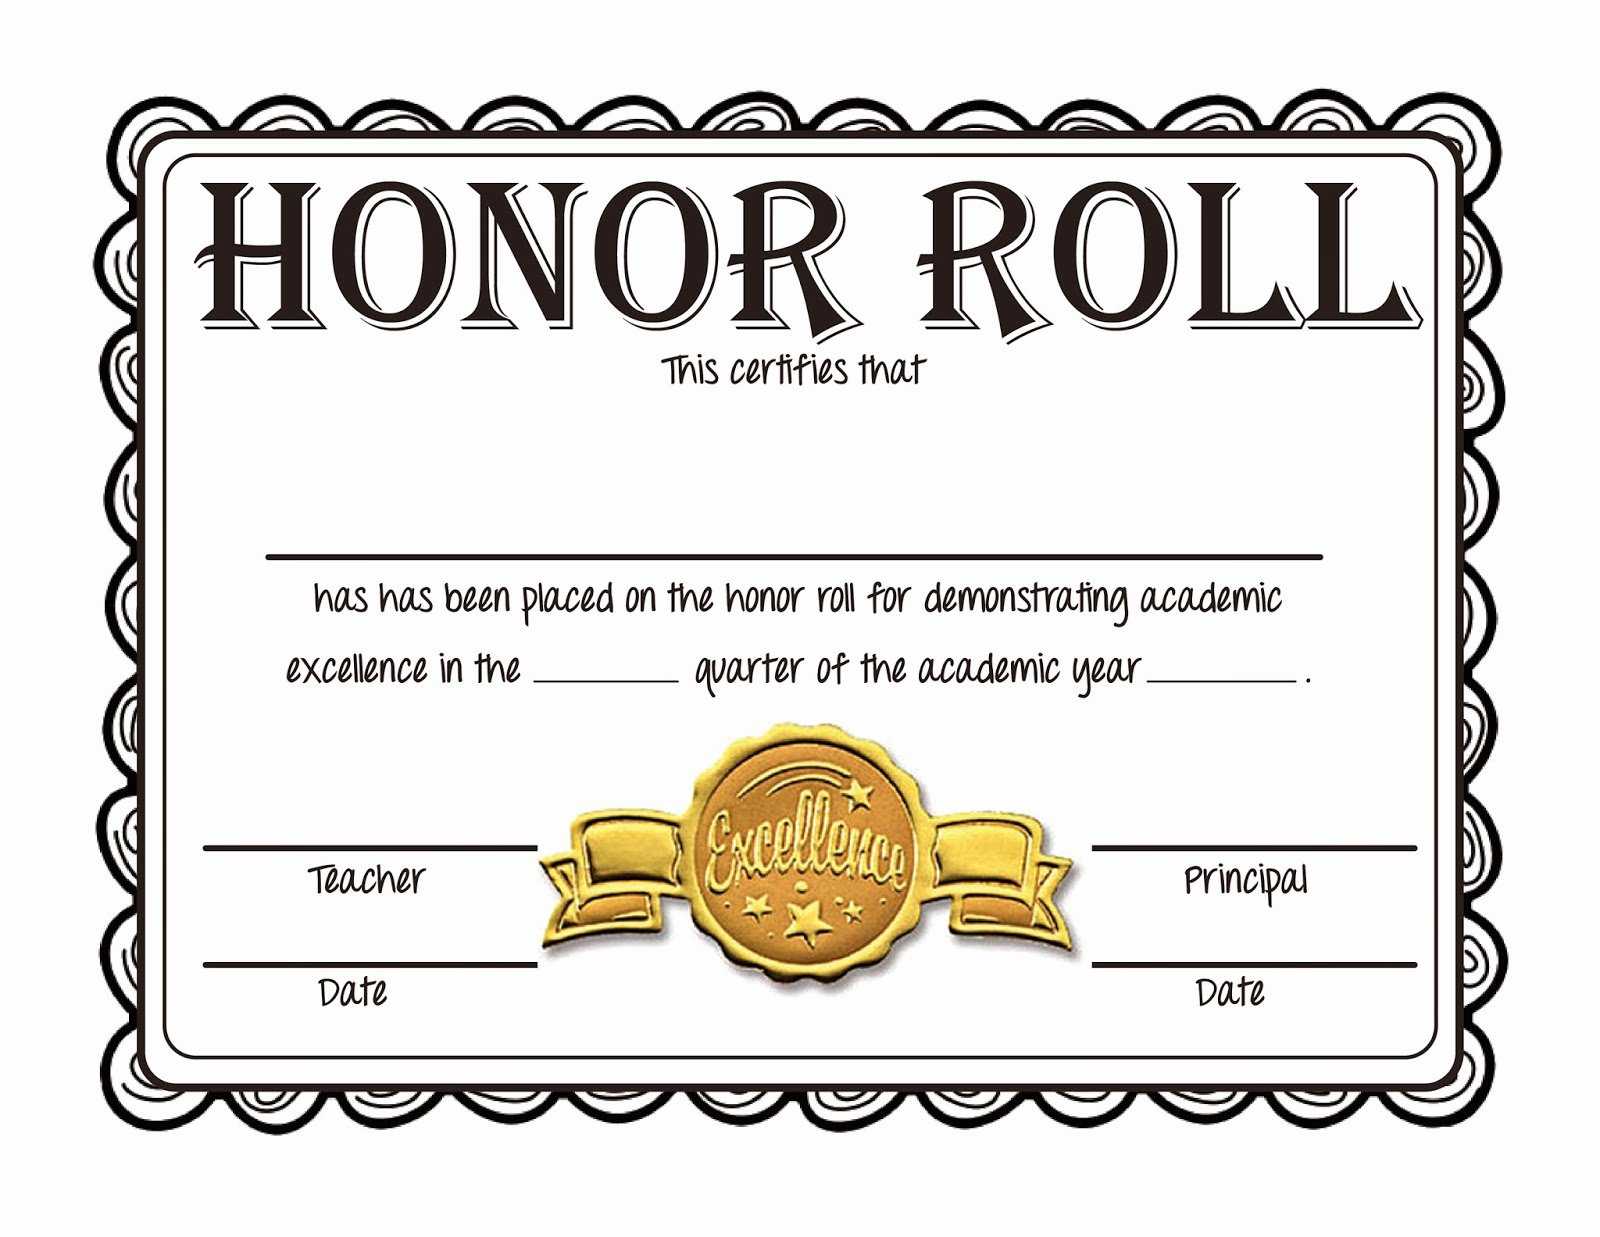 30 Honor Roll Certificate Template | Pryncepality For Honor Roll Certificate Template